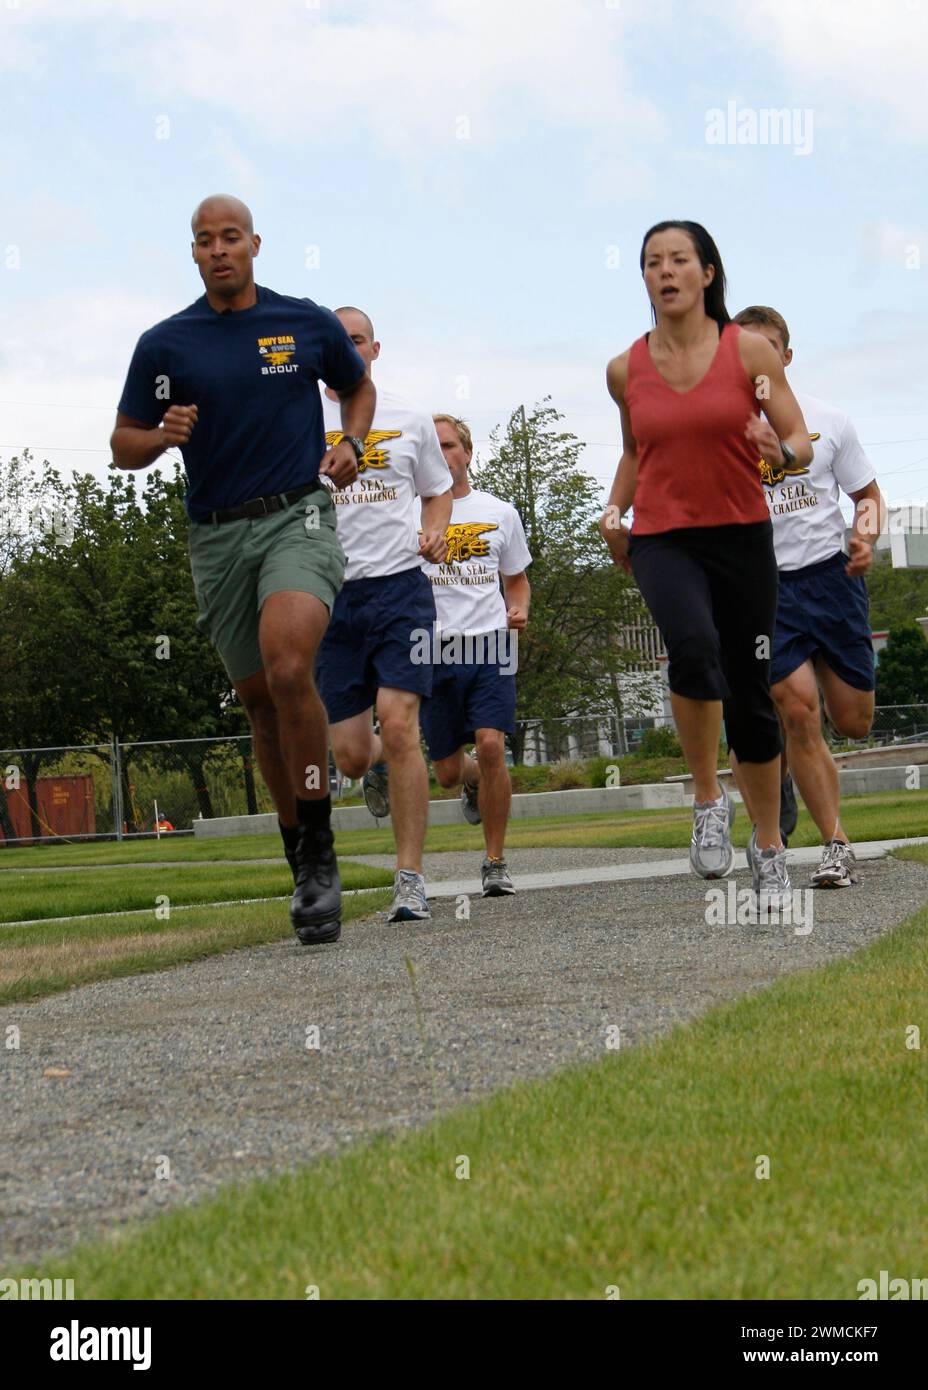 Seattle, United States of America. 07 July, 2009. U.S Navy Special Warfare Operator 1st Class David Goggins, left, runs alongside Q13 Fox TV news anchor Lara Yamada, right, to promote the upcoming Navy SEAL Fitness Challenge, July 7, 2009 in Seattle, Washington. Googins is know as the “Toughest Man Alive” from his extreme sports exploits.  Credit: MC2 Michelle Kapica/US Navy Photo/Alamy Live News Stock Photo